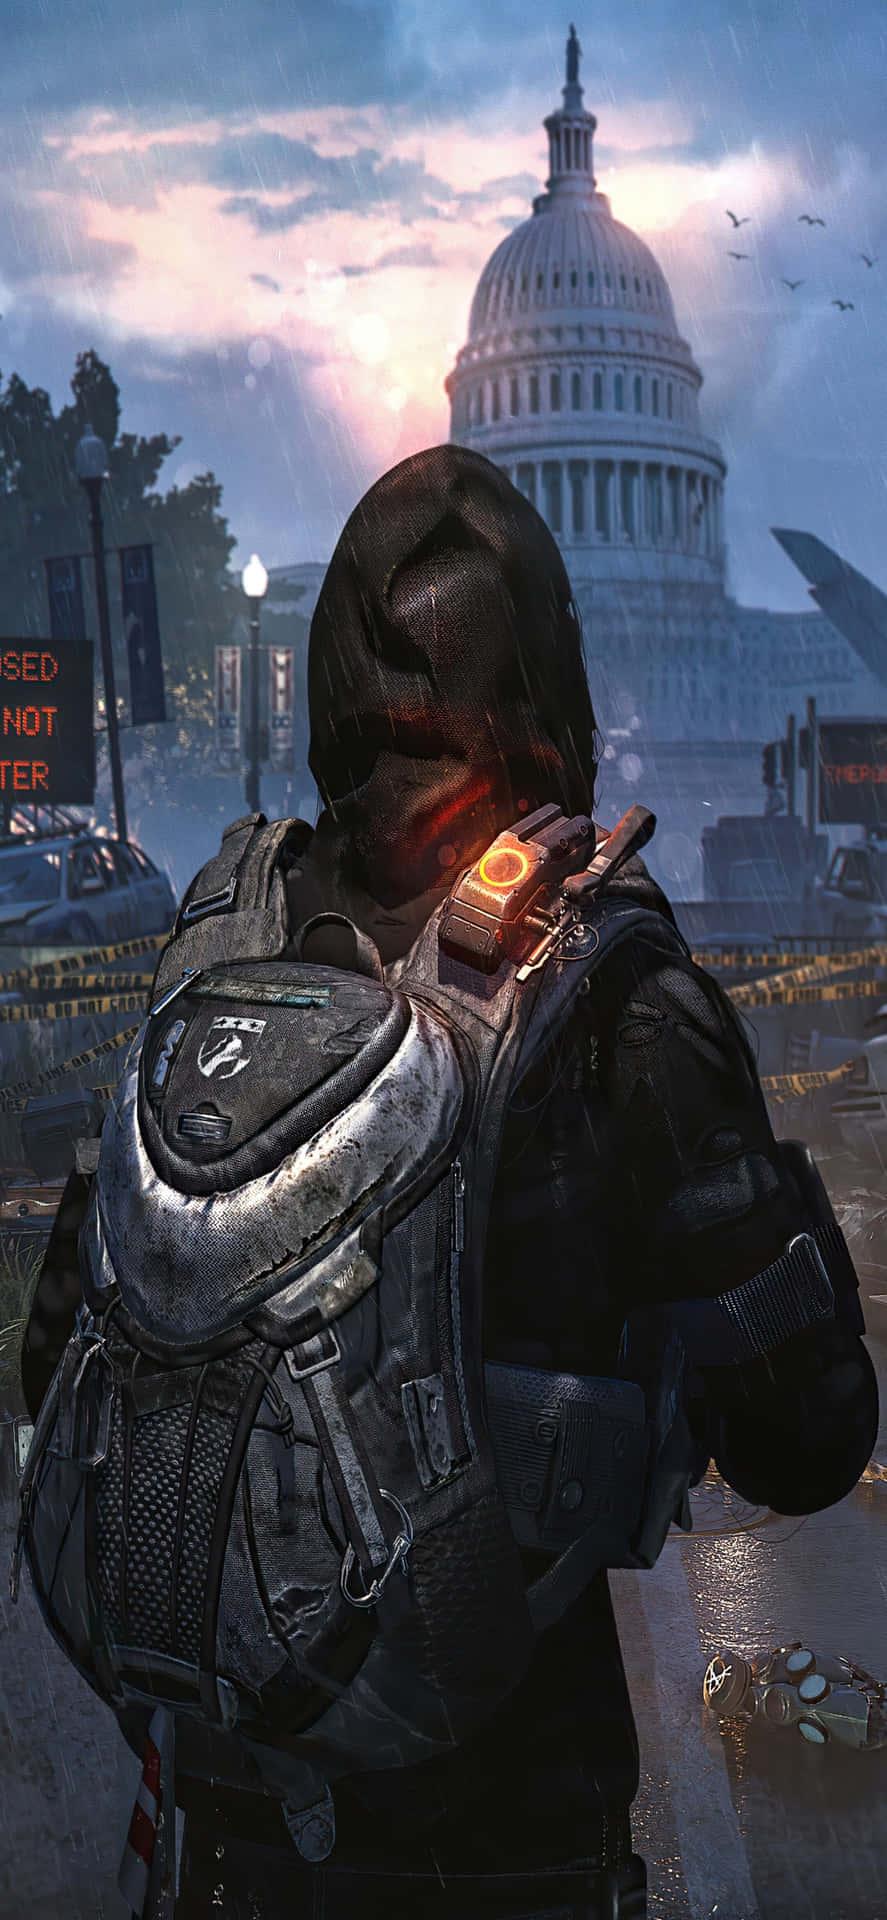 Iphone Xs The Division Background Hooded Man In Washington